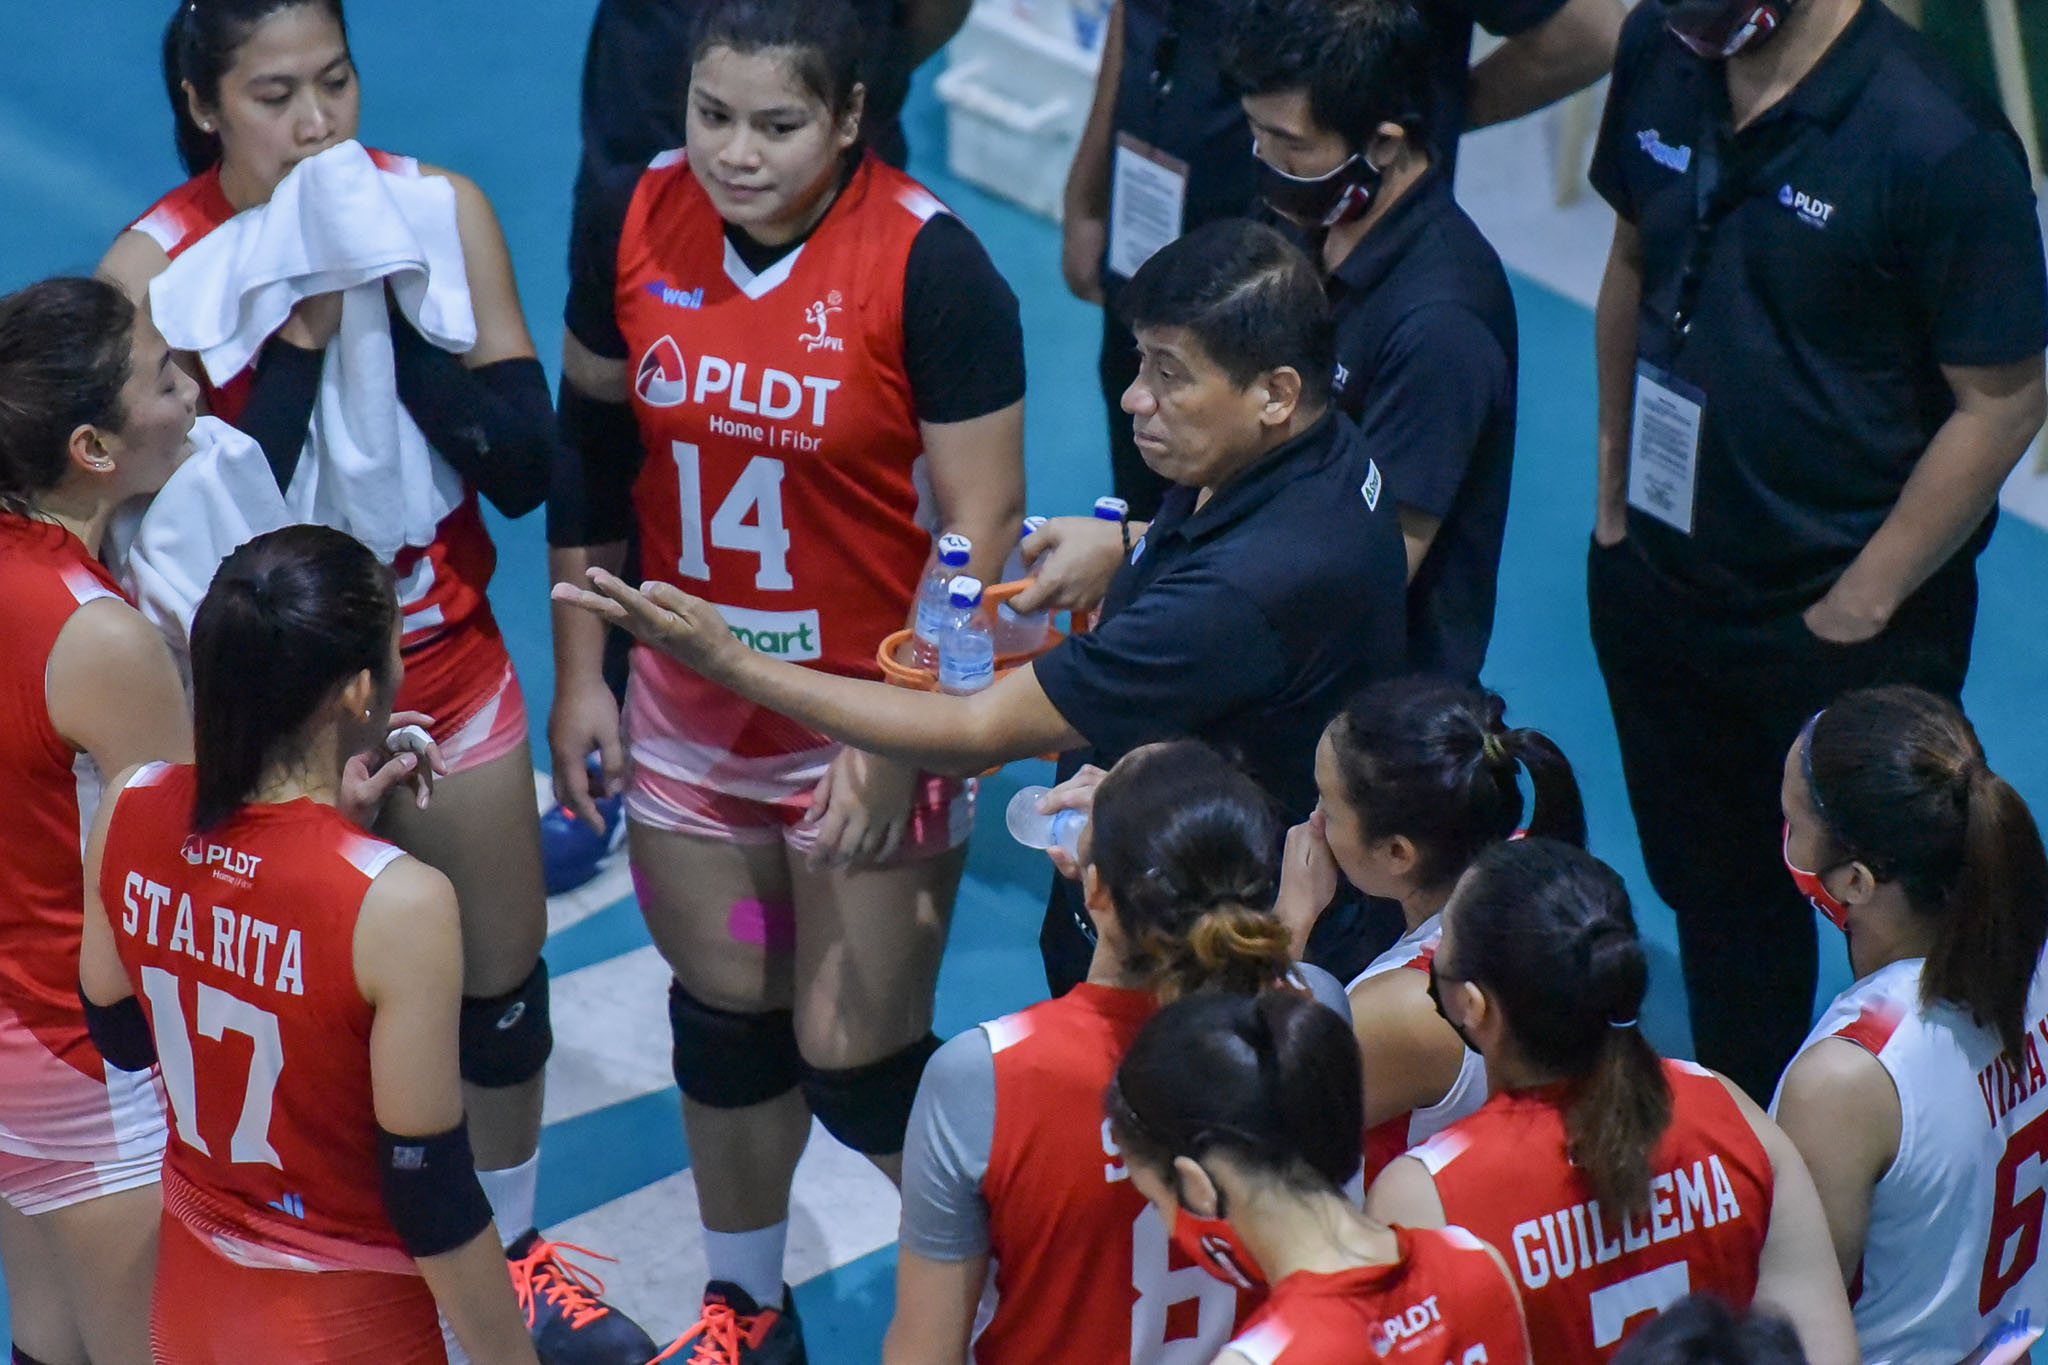 2021-PVL-Open-PLDT-vs.-Cignal-Roger-Gorayeb-0277 Dimaculangan trusting the PLDT process after ending PVL Open on a high News PVL Volleyball  - philippine sports news